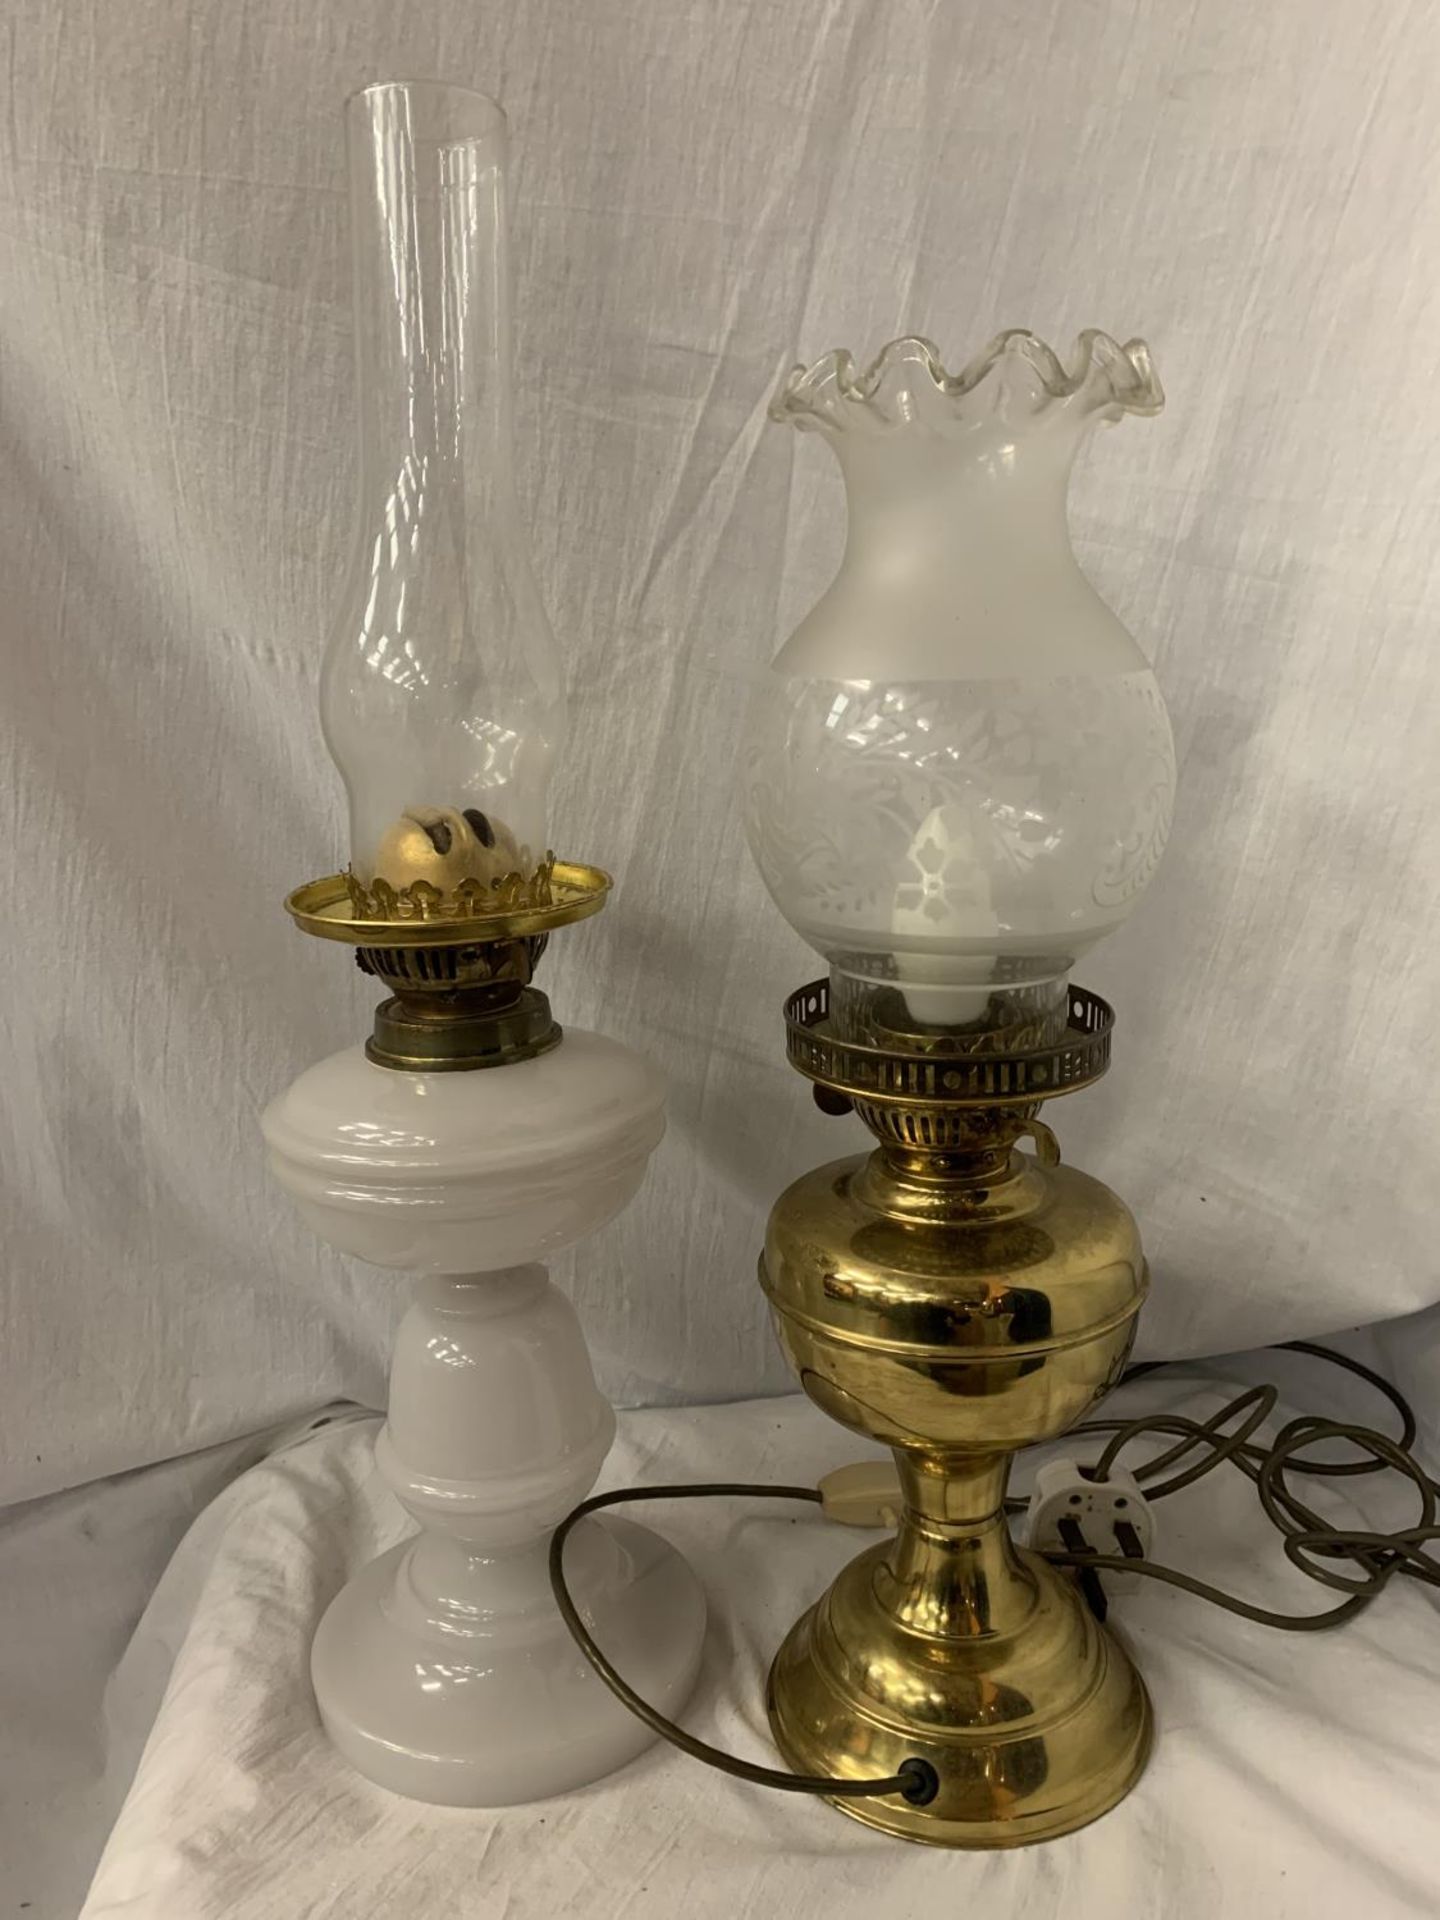 TWO OIL LAMPS, ONE WITH A WHITE GLASS BASE AND THE OTHER A BRASS EXAMPLE - Image 2 of 2